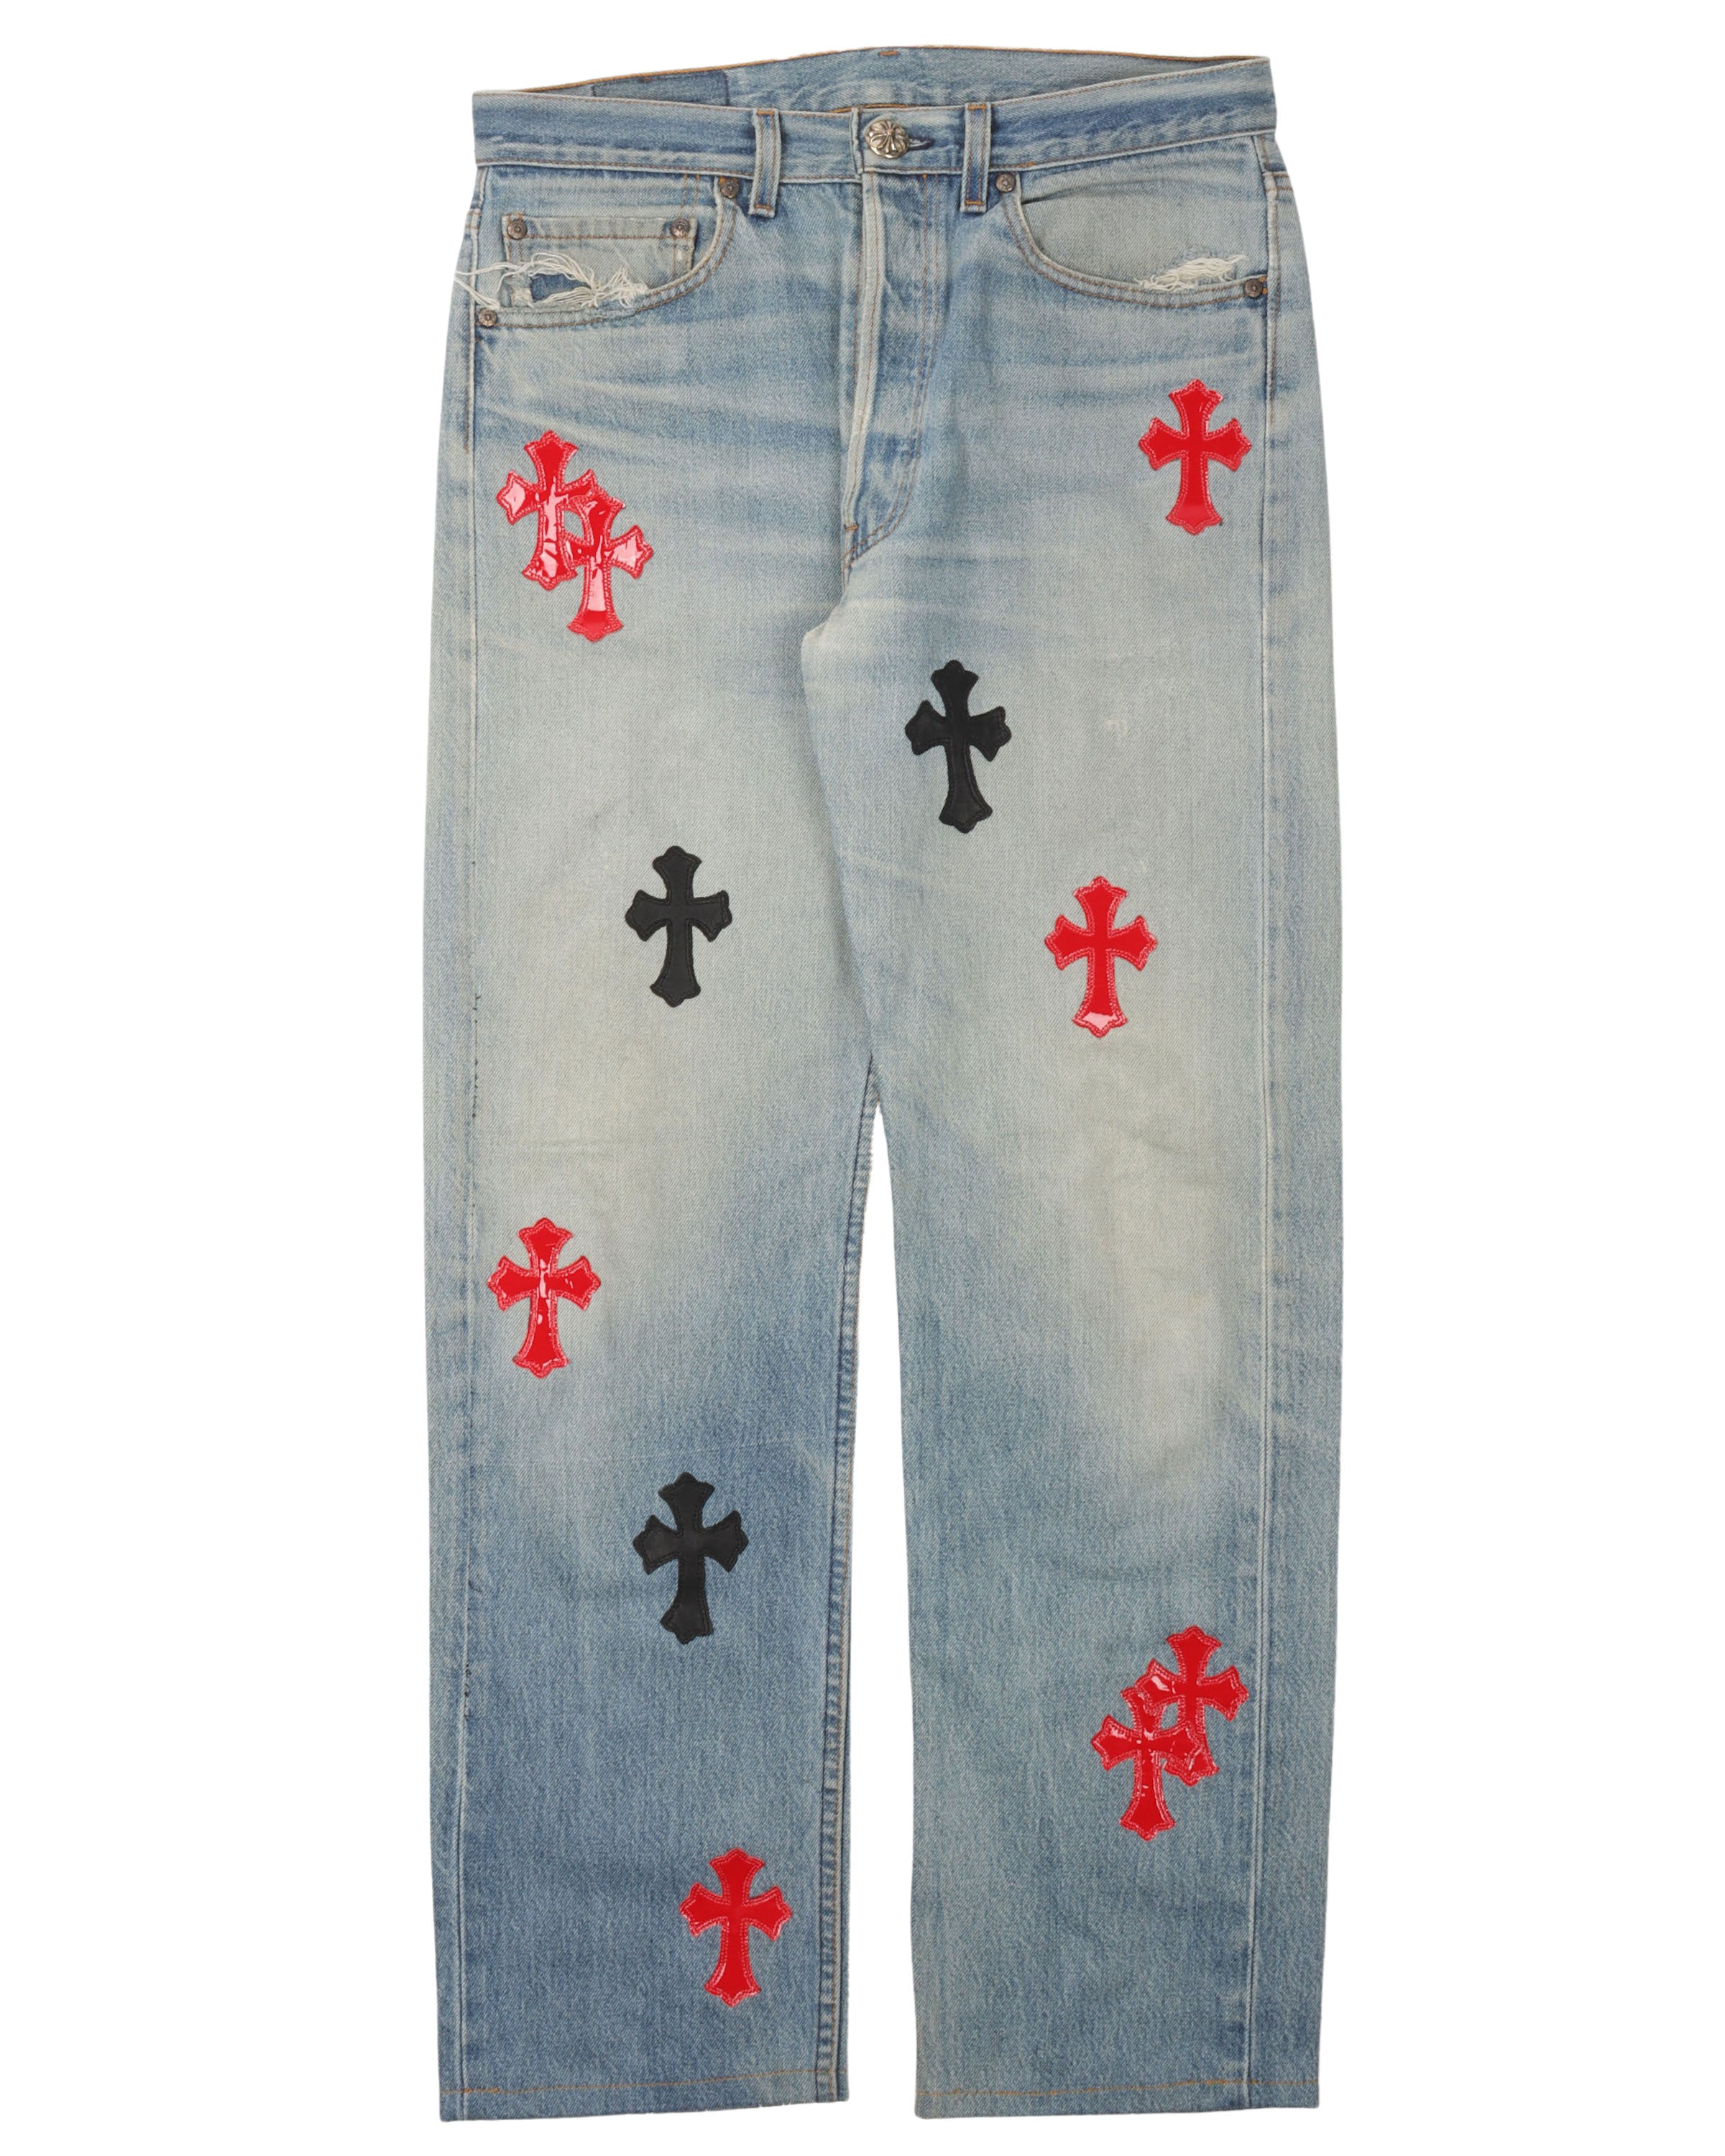 Chrome Hearts Custom Patent Leather Cross Patch Levi's Jeans